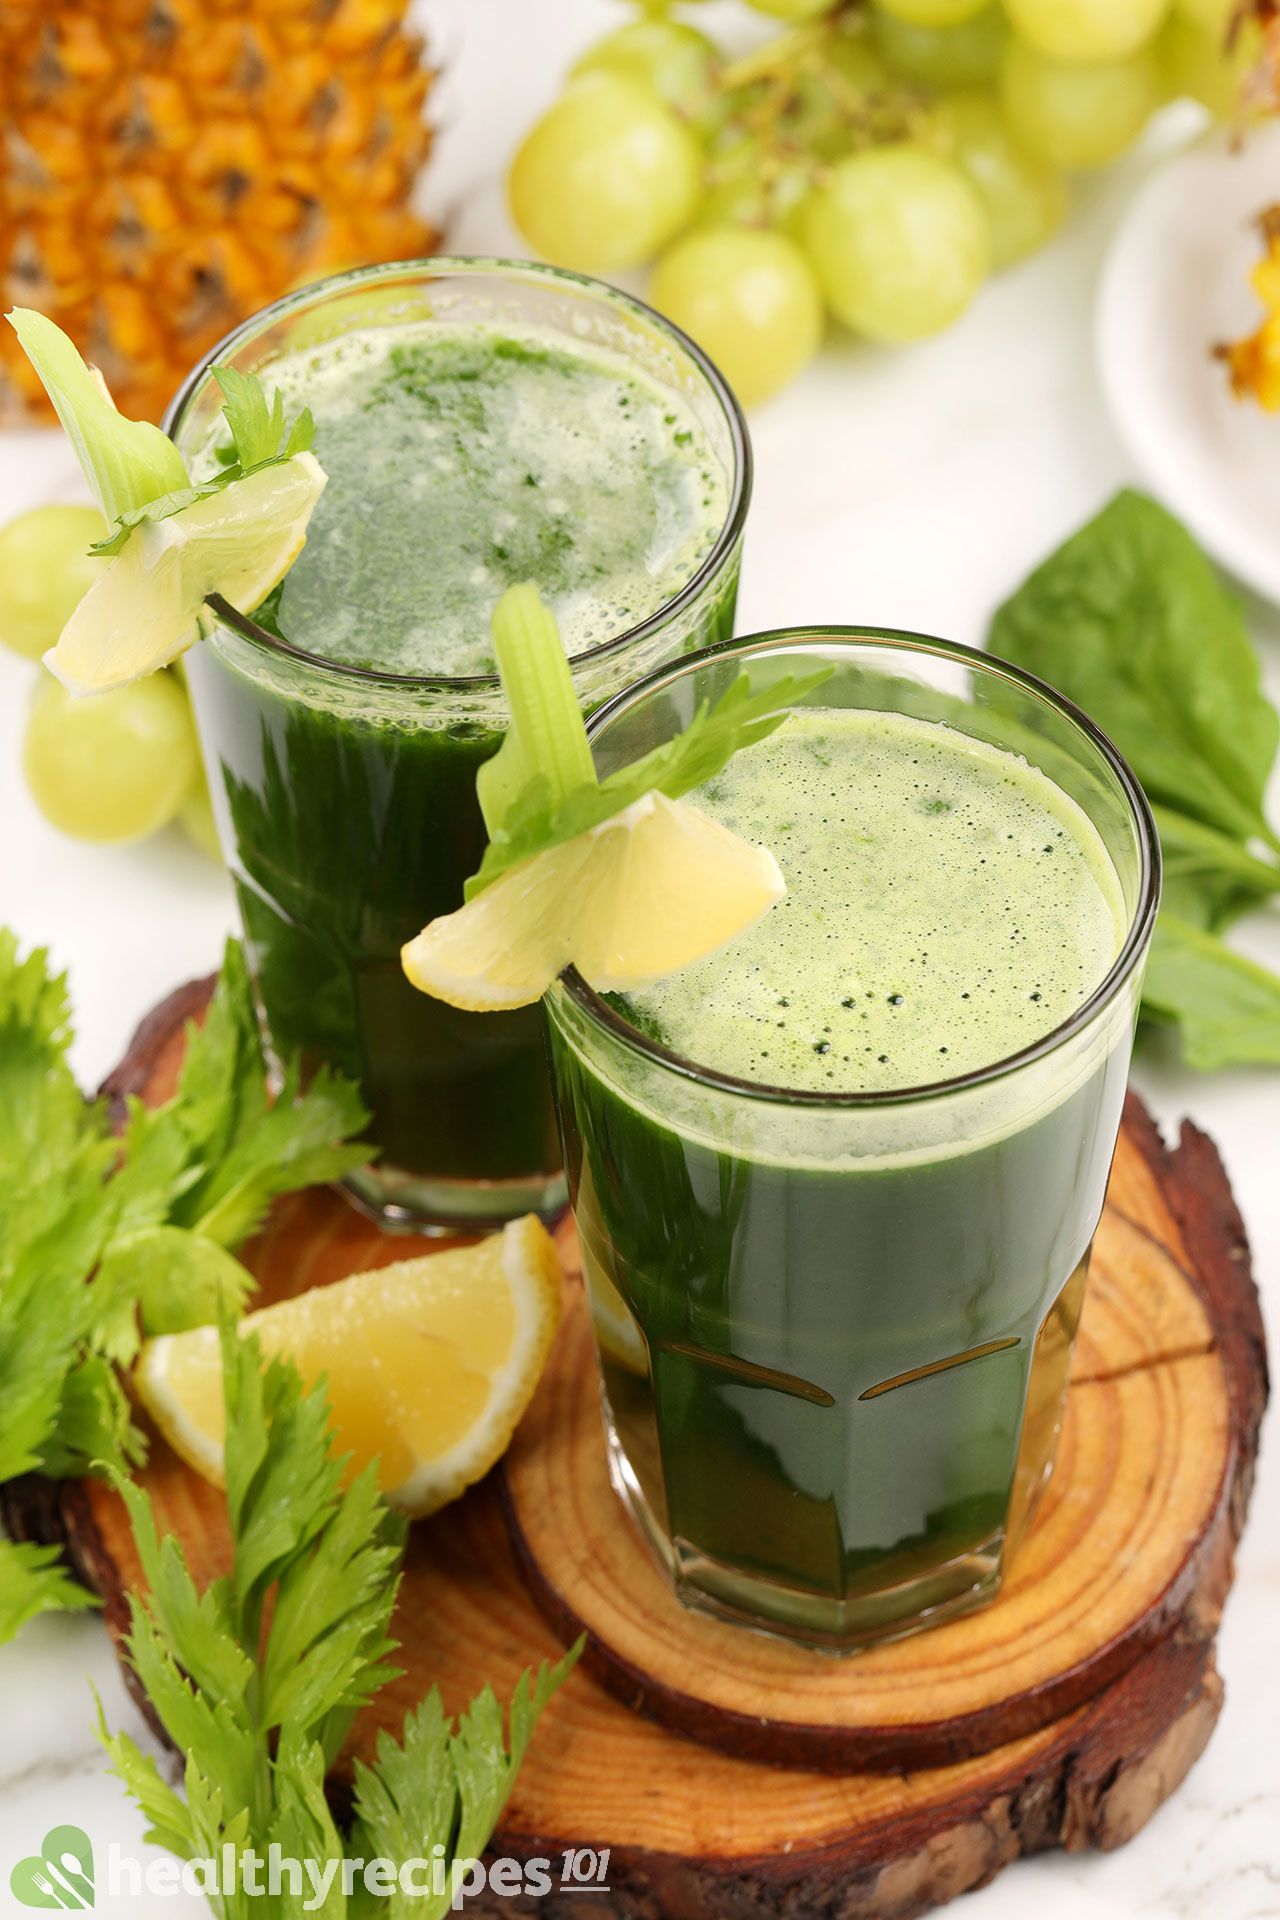 spinach and apple juice benefits